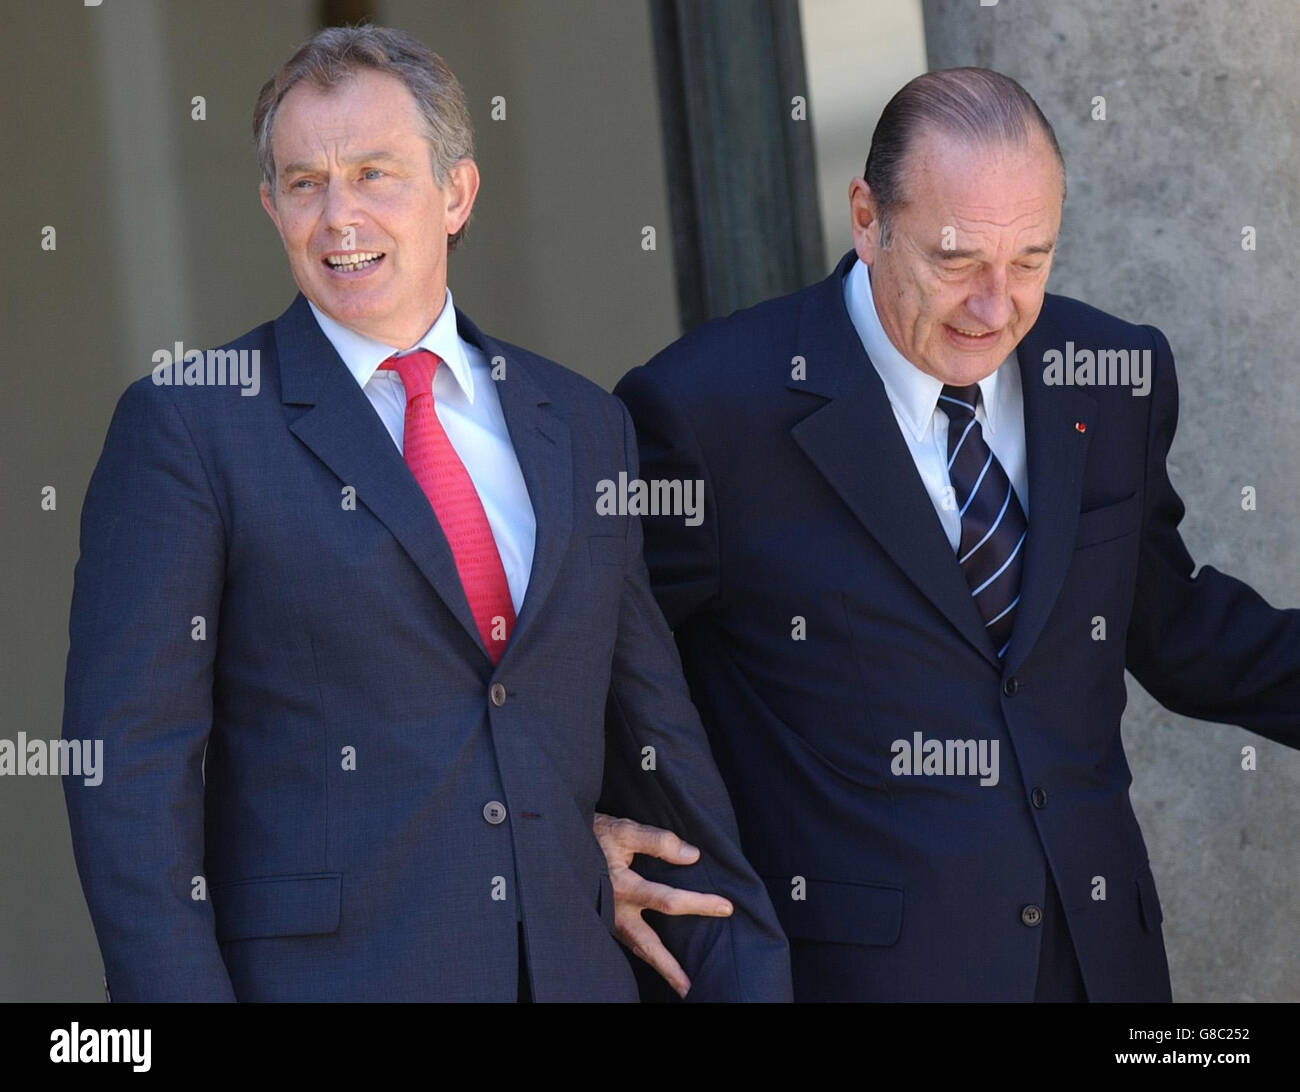 Britain's Prime Minister Tony Blair with French president Jacques Chirac after they attended a United Nations seminar to highlight the so-called 'global compact' between the worlds of business and politics. Stock Photo